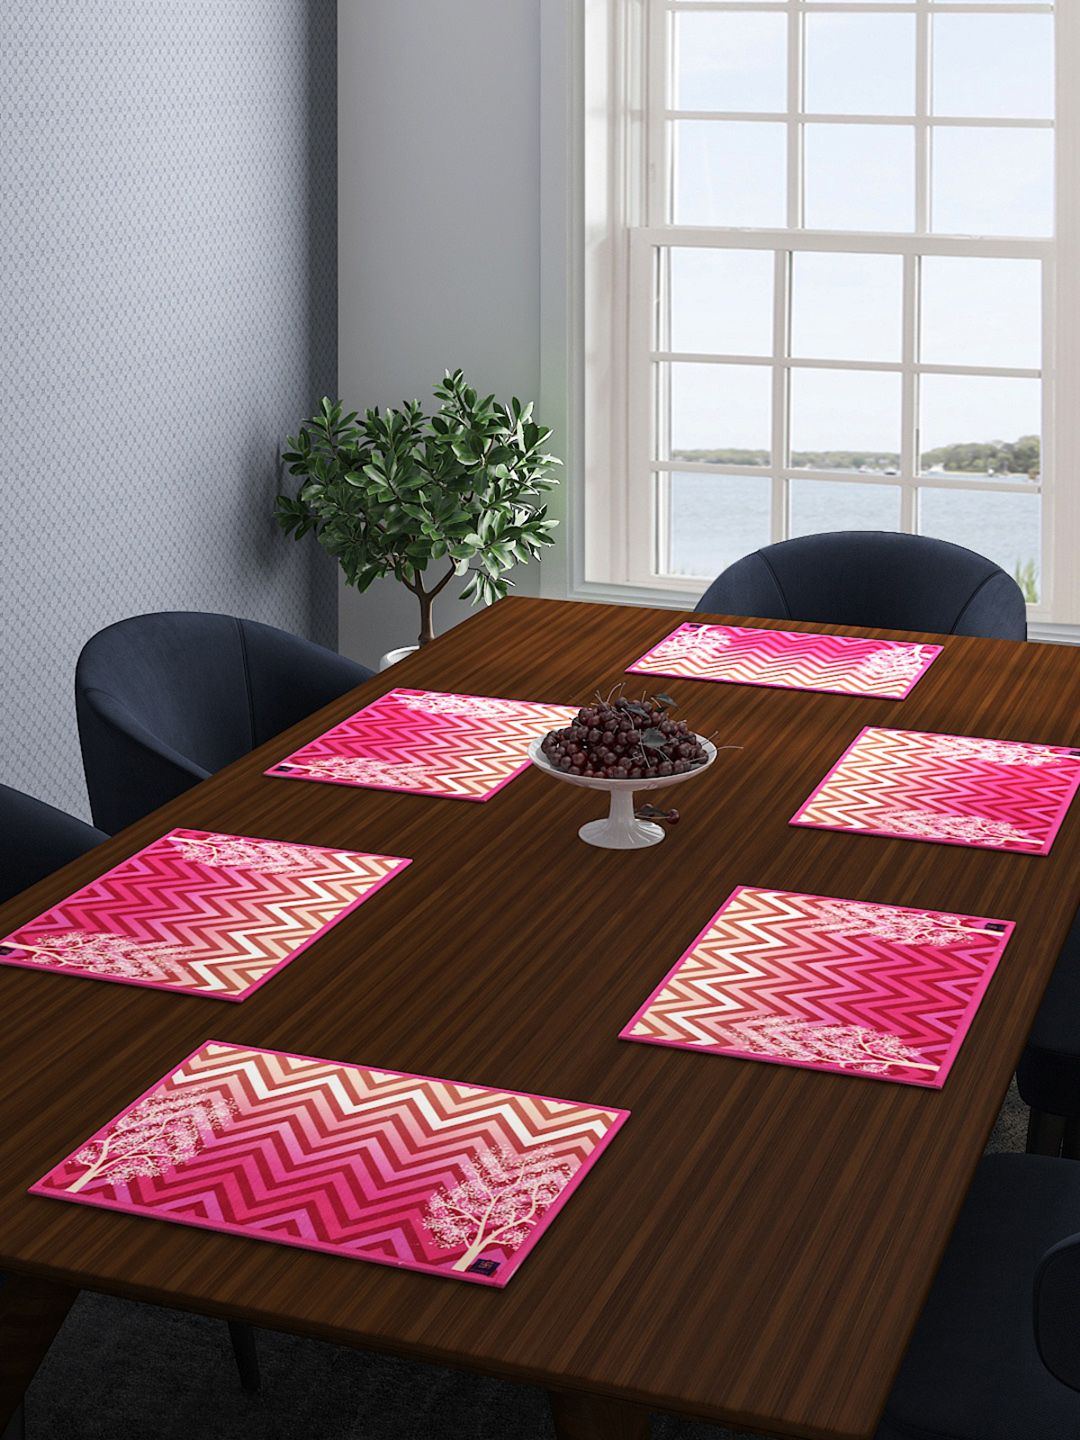 ROMEE Set of 6 Pink Geometric Printed Table Mats Price in India